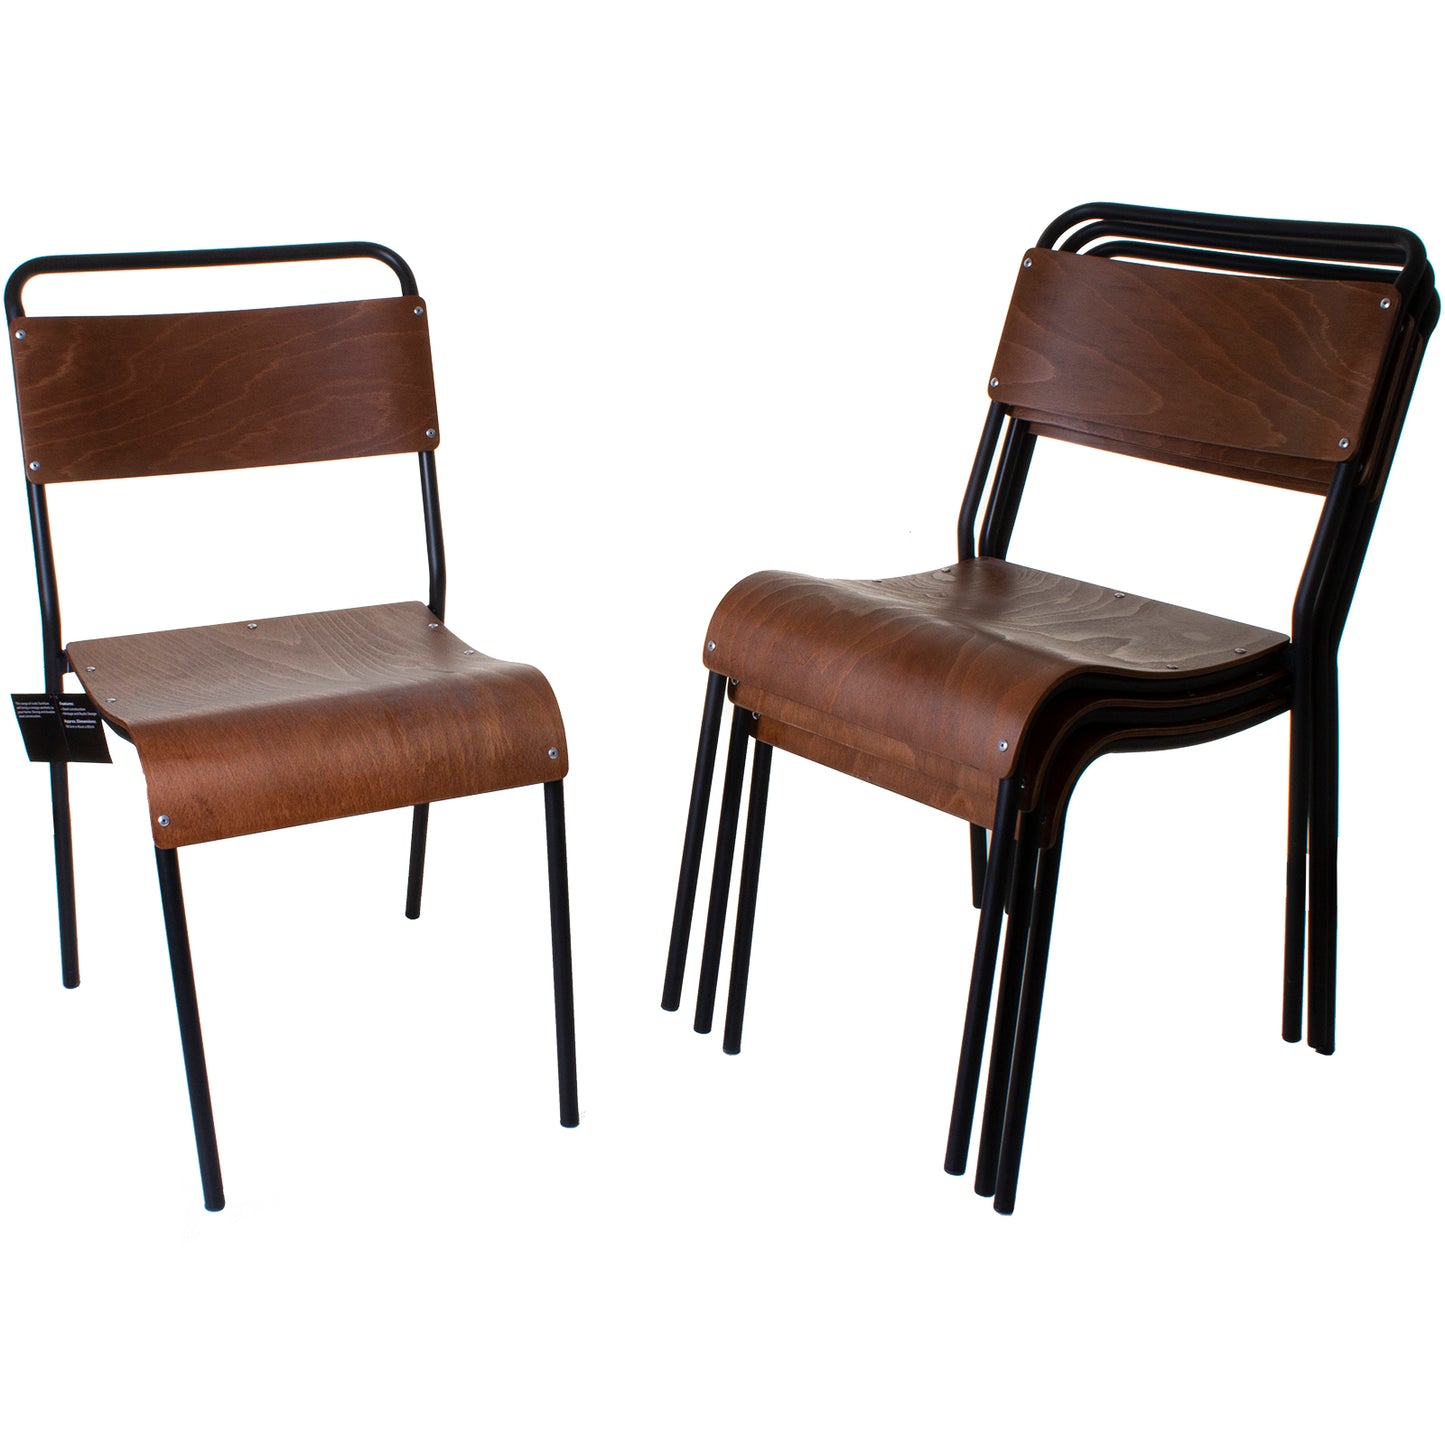 Set of 4 Rustic Chairs - Black